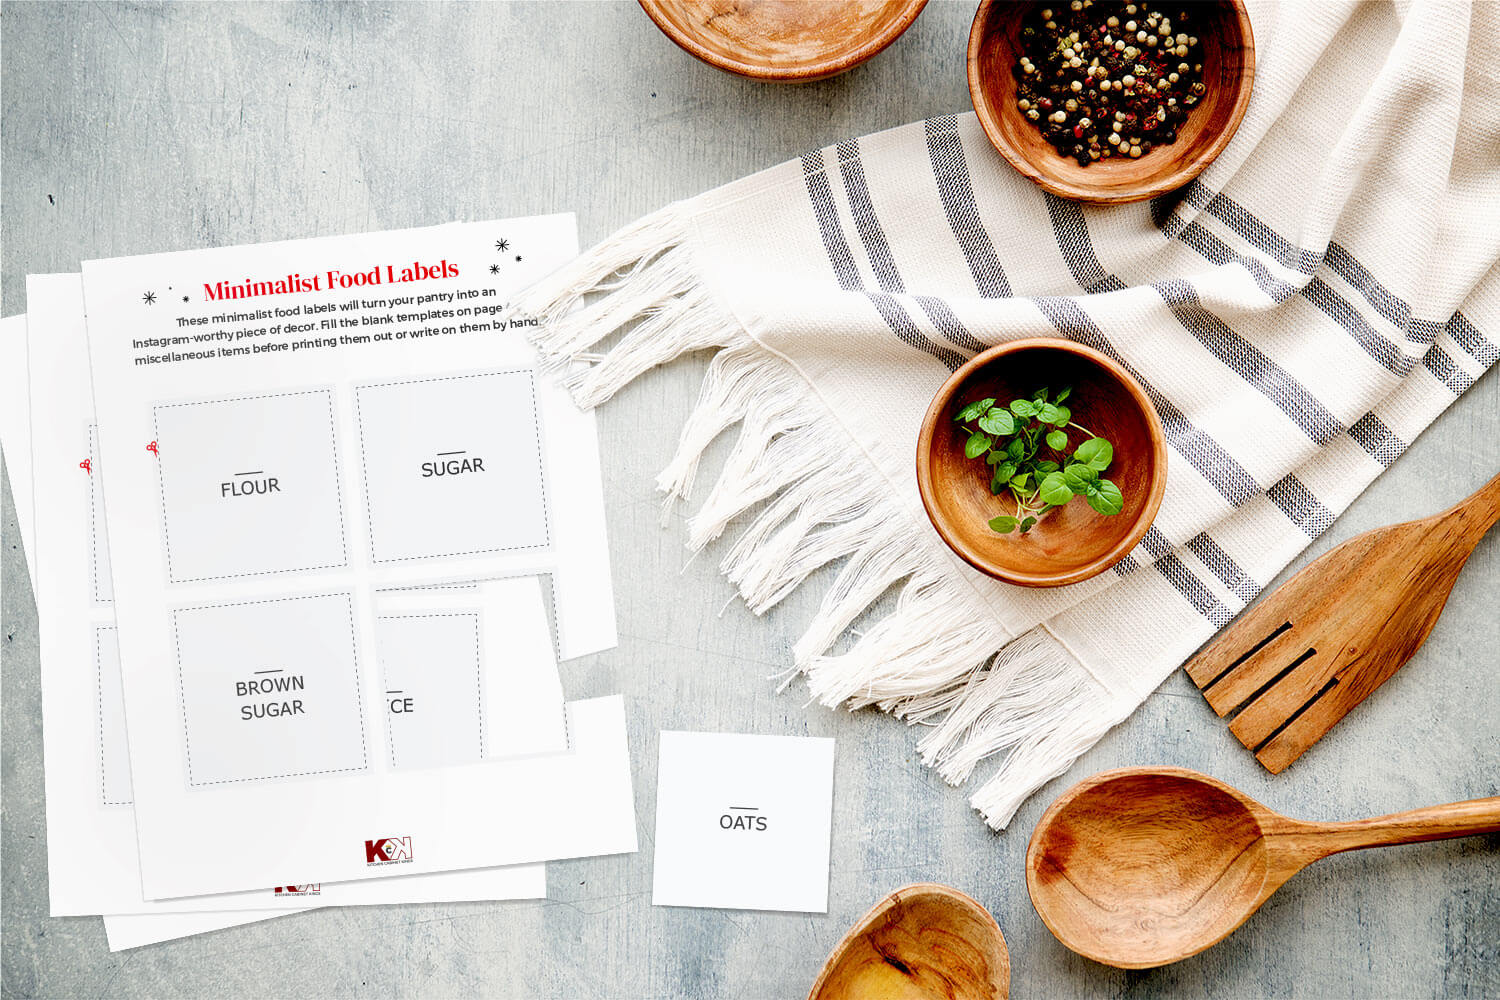 Minimalist food label templates on gray surface with white tablecloth and wooden kitchenware.